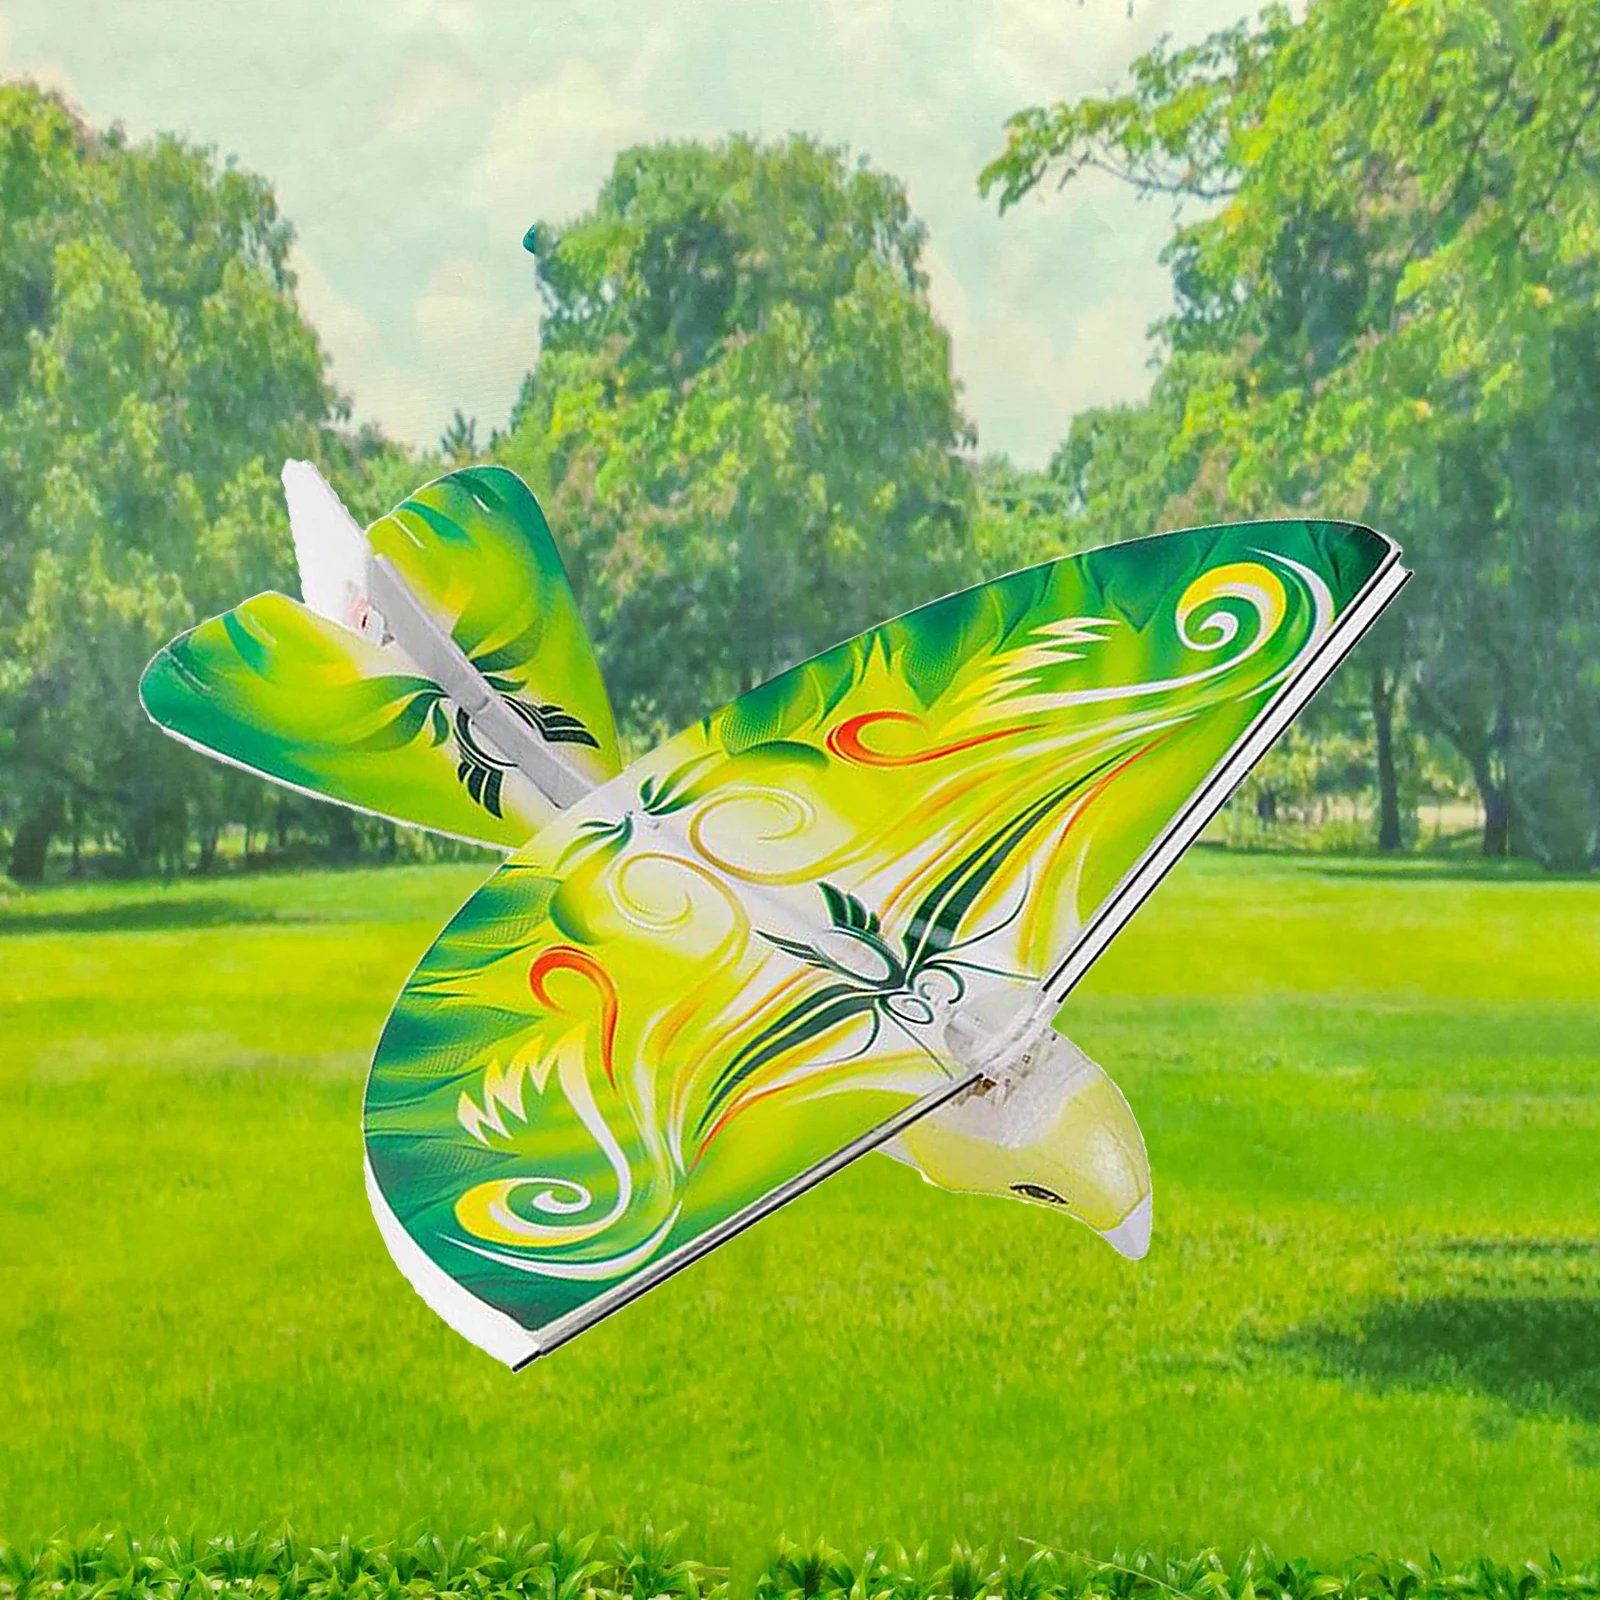 2.4G Electric Eagle Remote Control Bionic Bird Flying Wing Flapping Simulation Bird Toy Gift For Children Kids